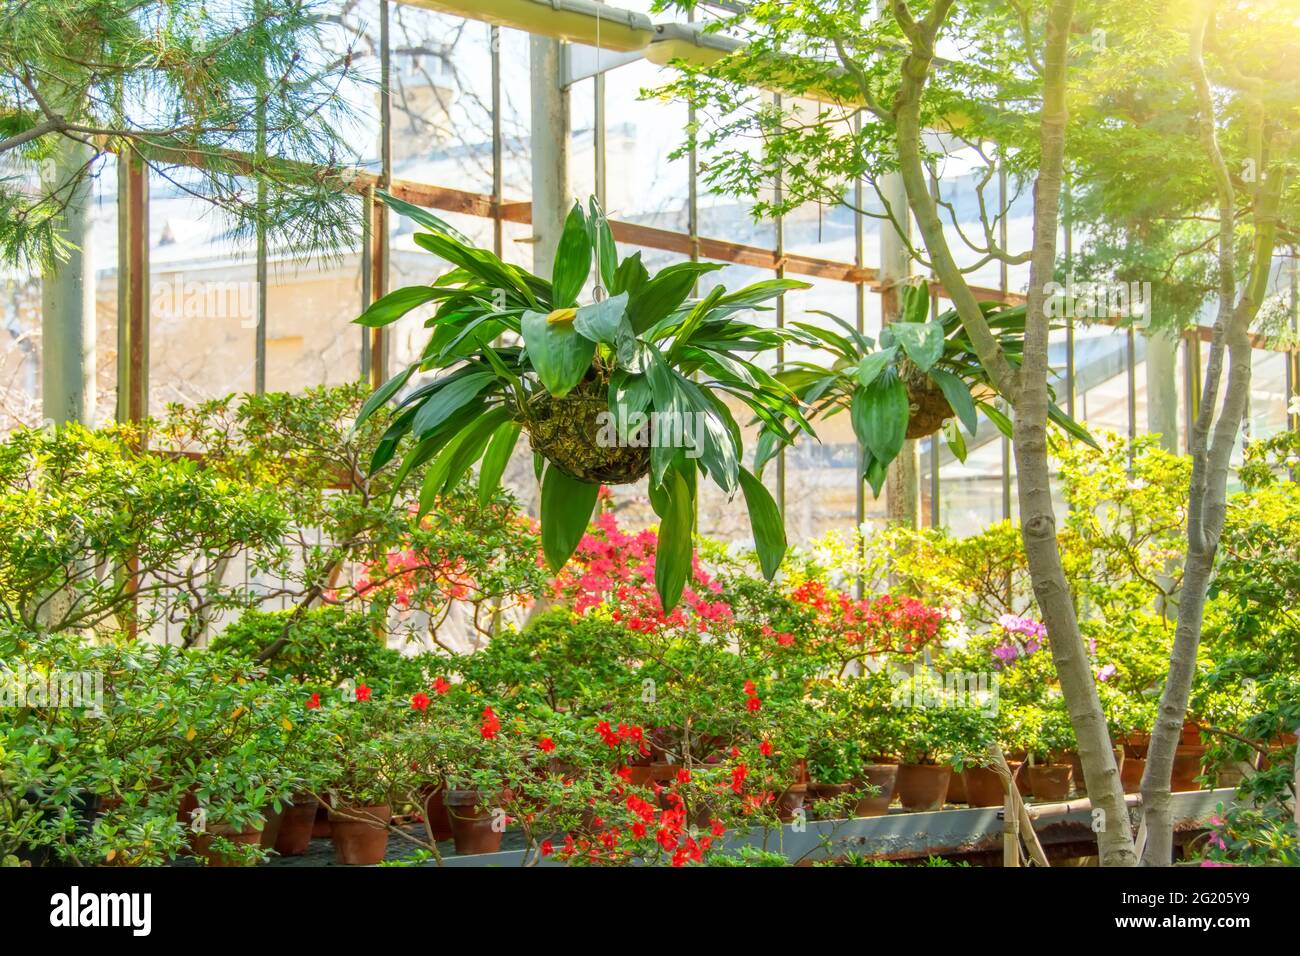 White Coelogyne orchid in a hanging coconut pot among maples and flowering rhododendrons, in the greenhouse of a subtropical garden Stock Photo